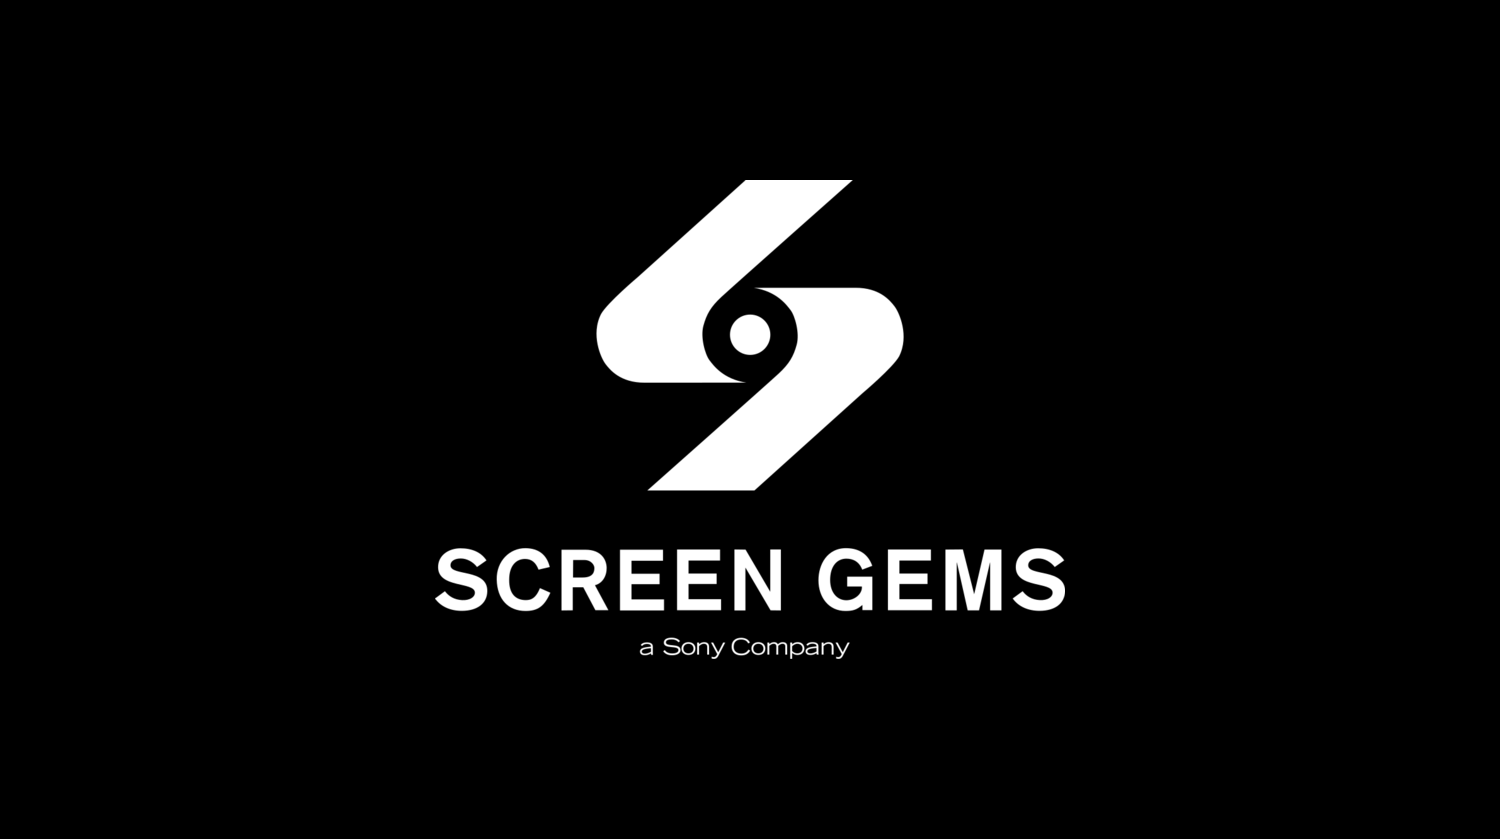 Сони пикчерс. Screen Gems. Screen Gems a Sony Company. Screen Gems logo. Screen Gems Sony pictures.